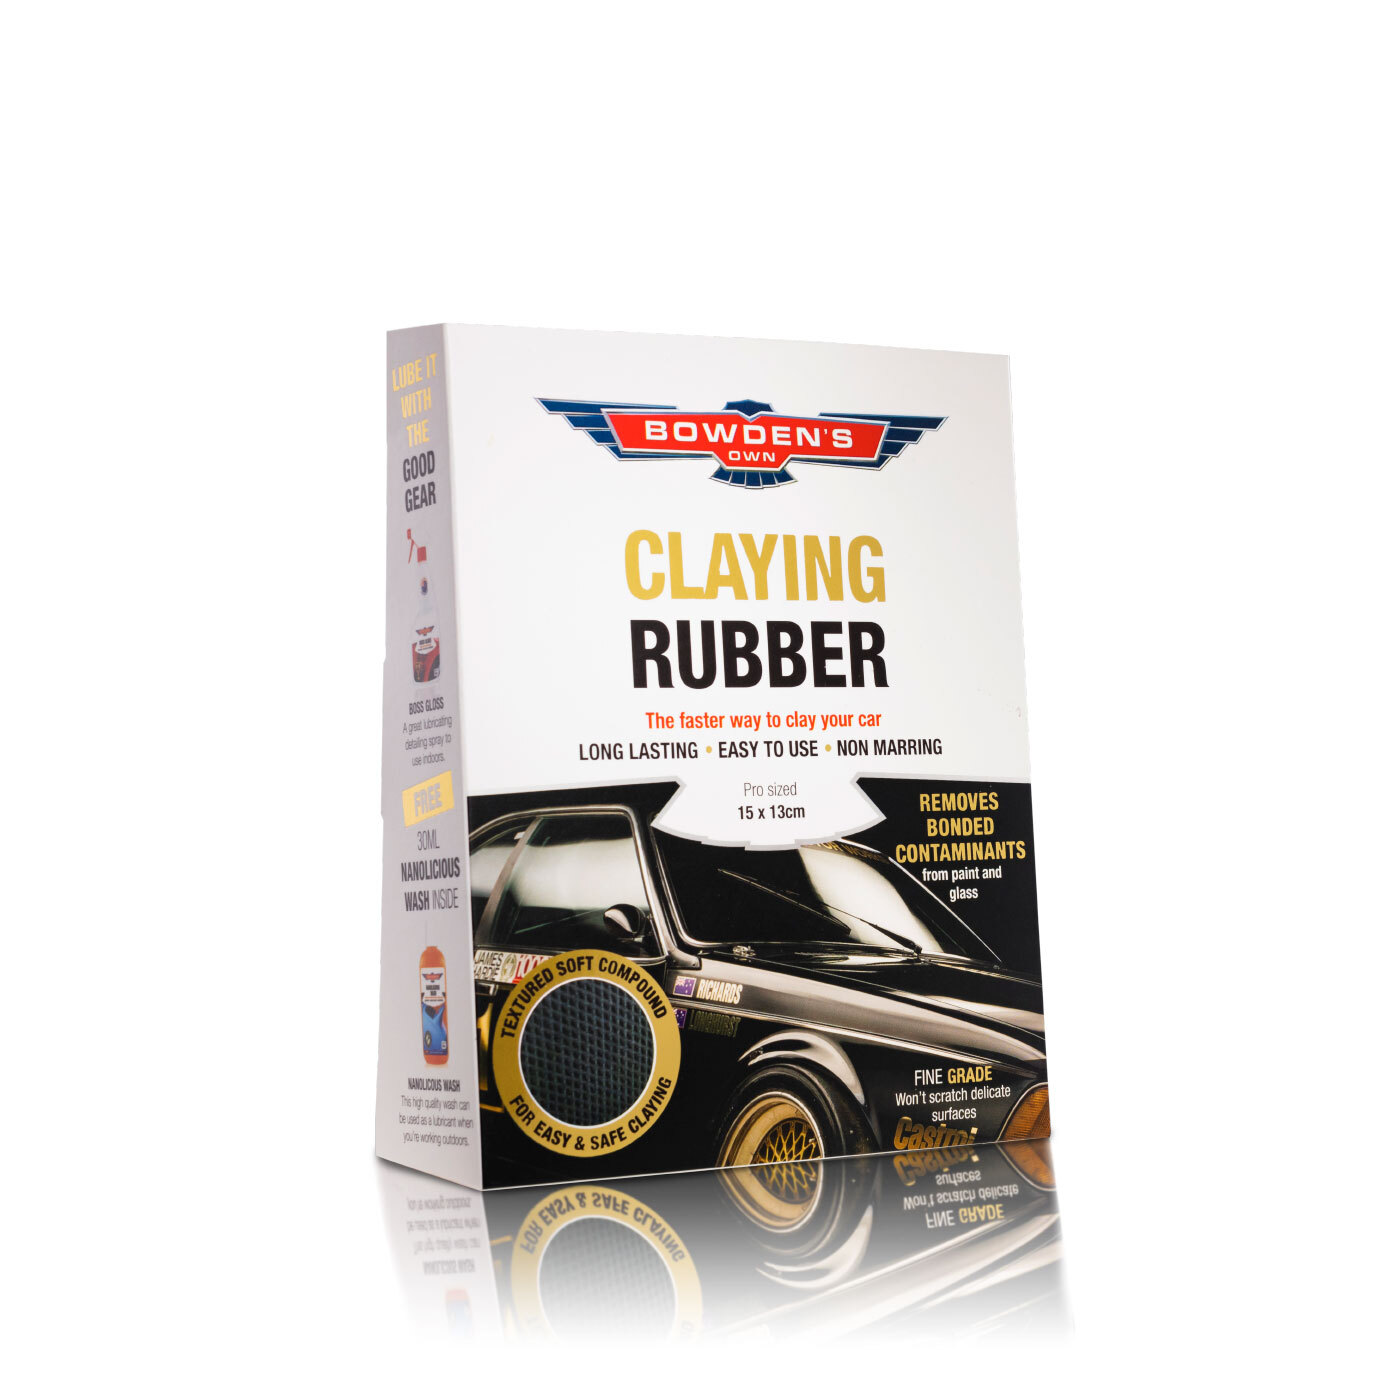 Claying Rubber